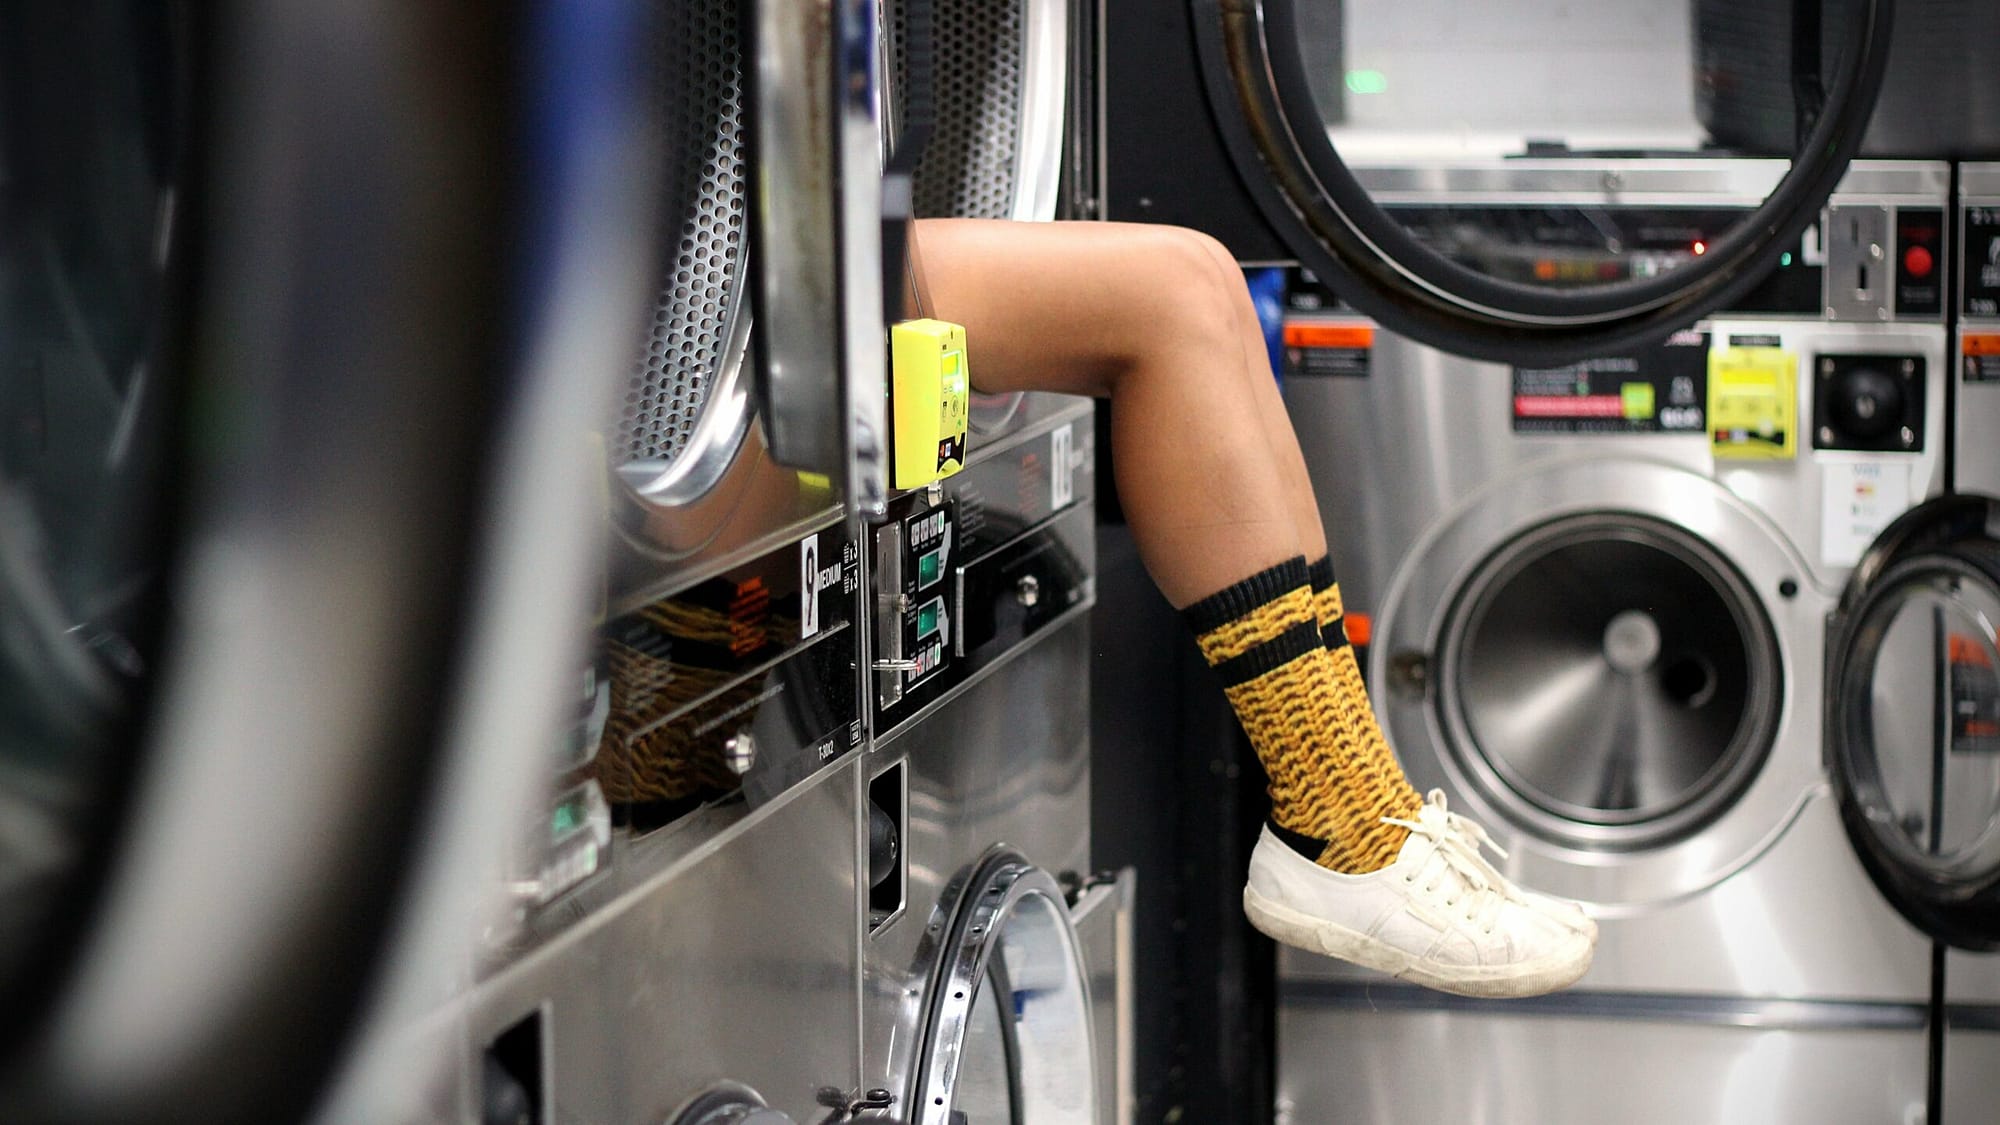 A pair of legs sticking out of a dryer, wearing long yellow socks and white shoes, at a laundromat.